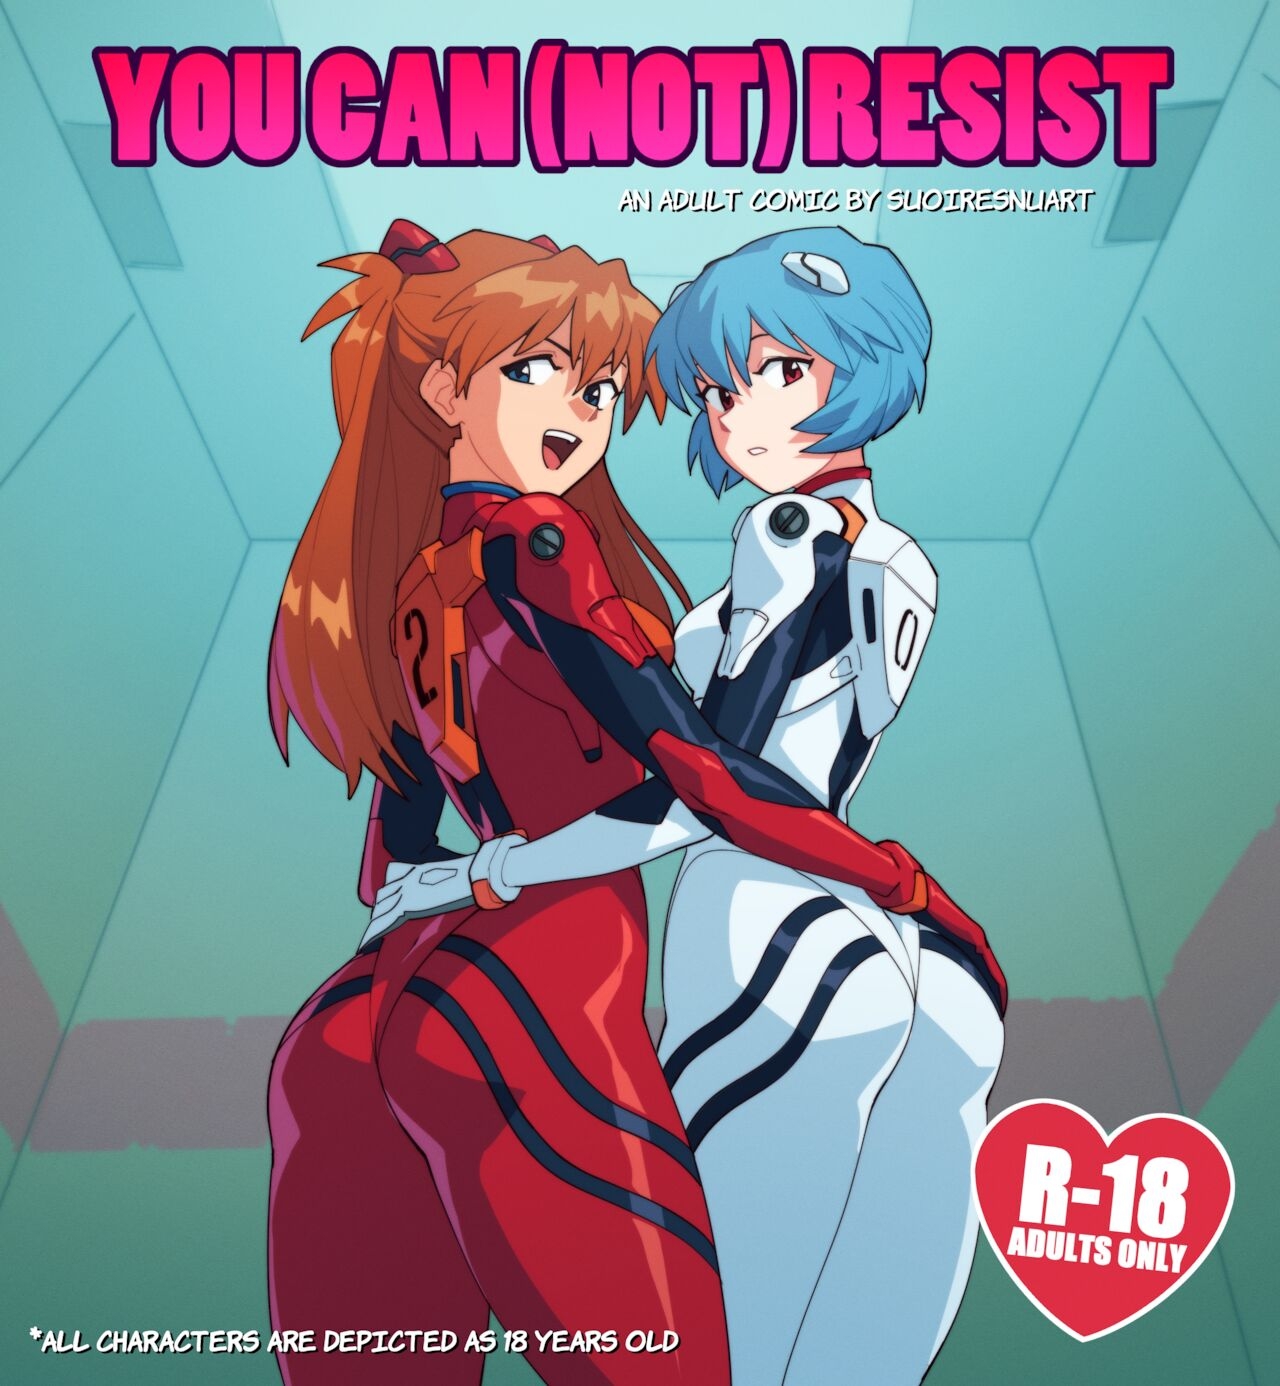 You Can (Not) Resist [+18] by suioresnuart 0